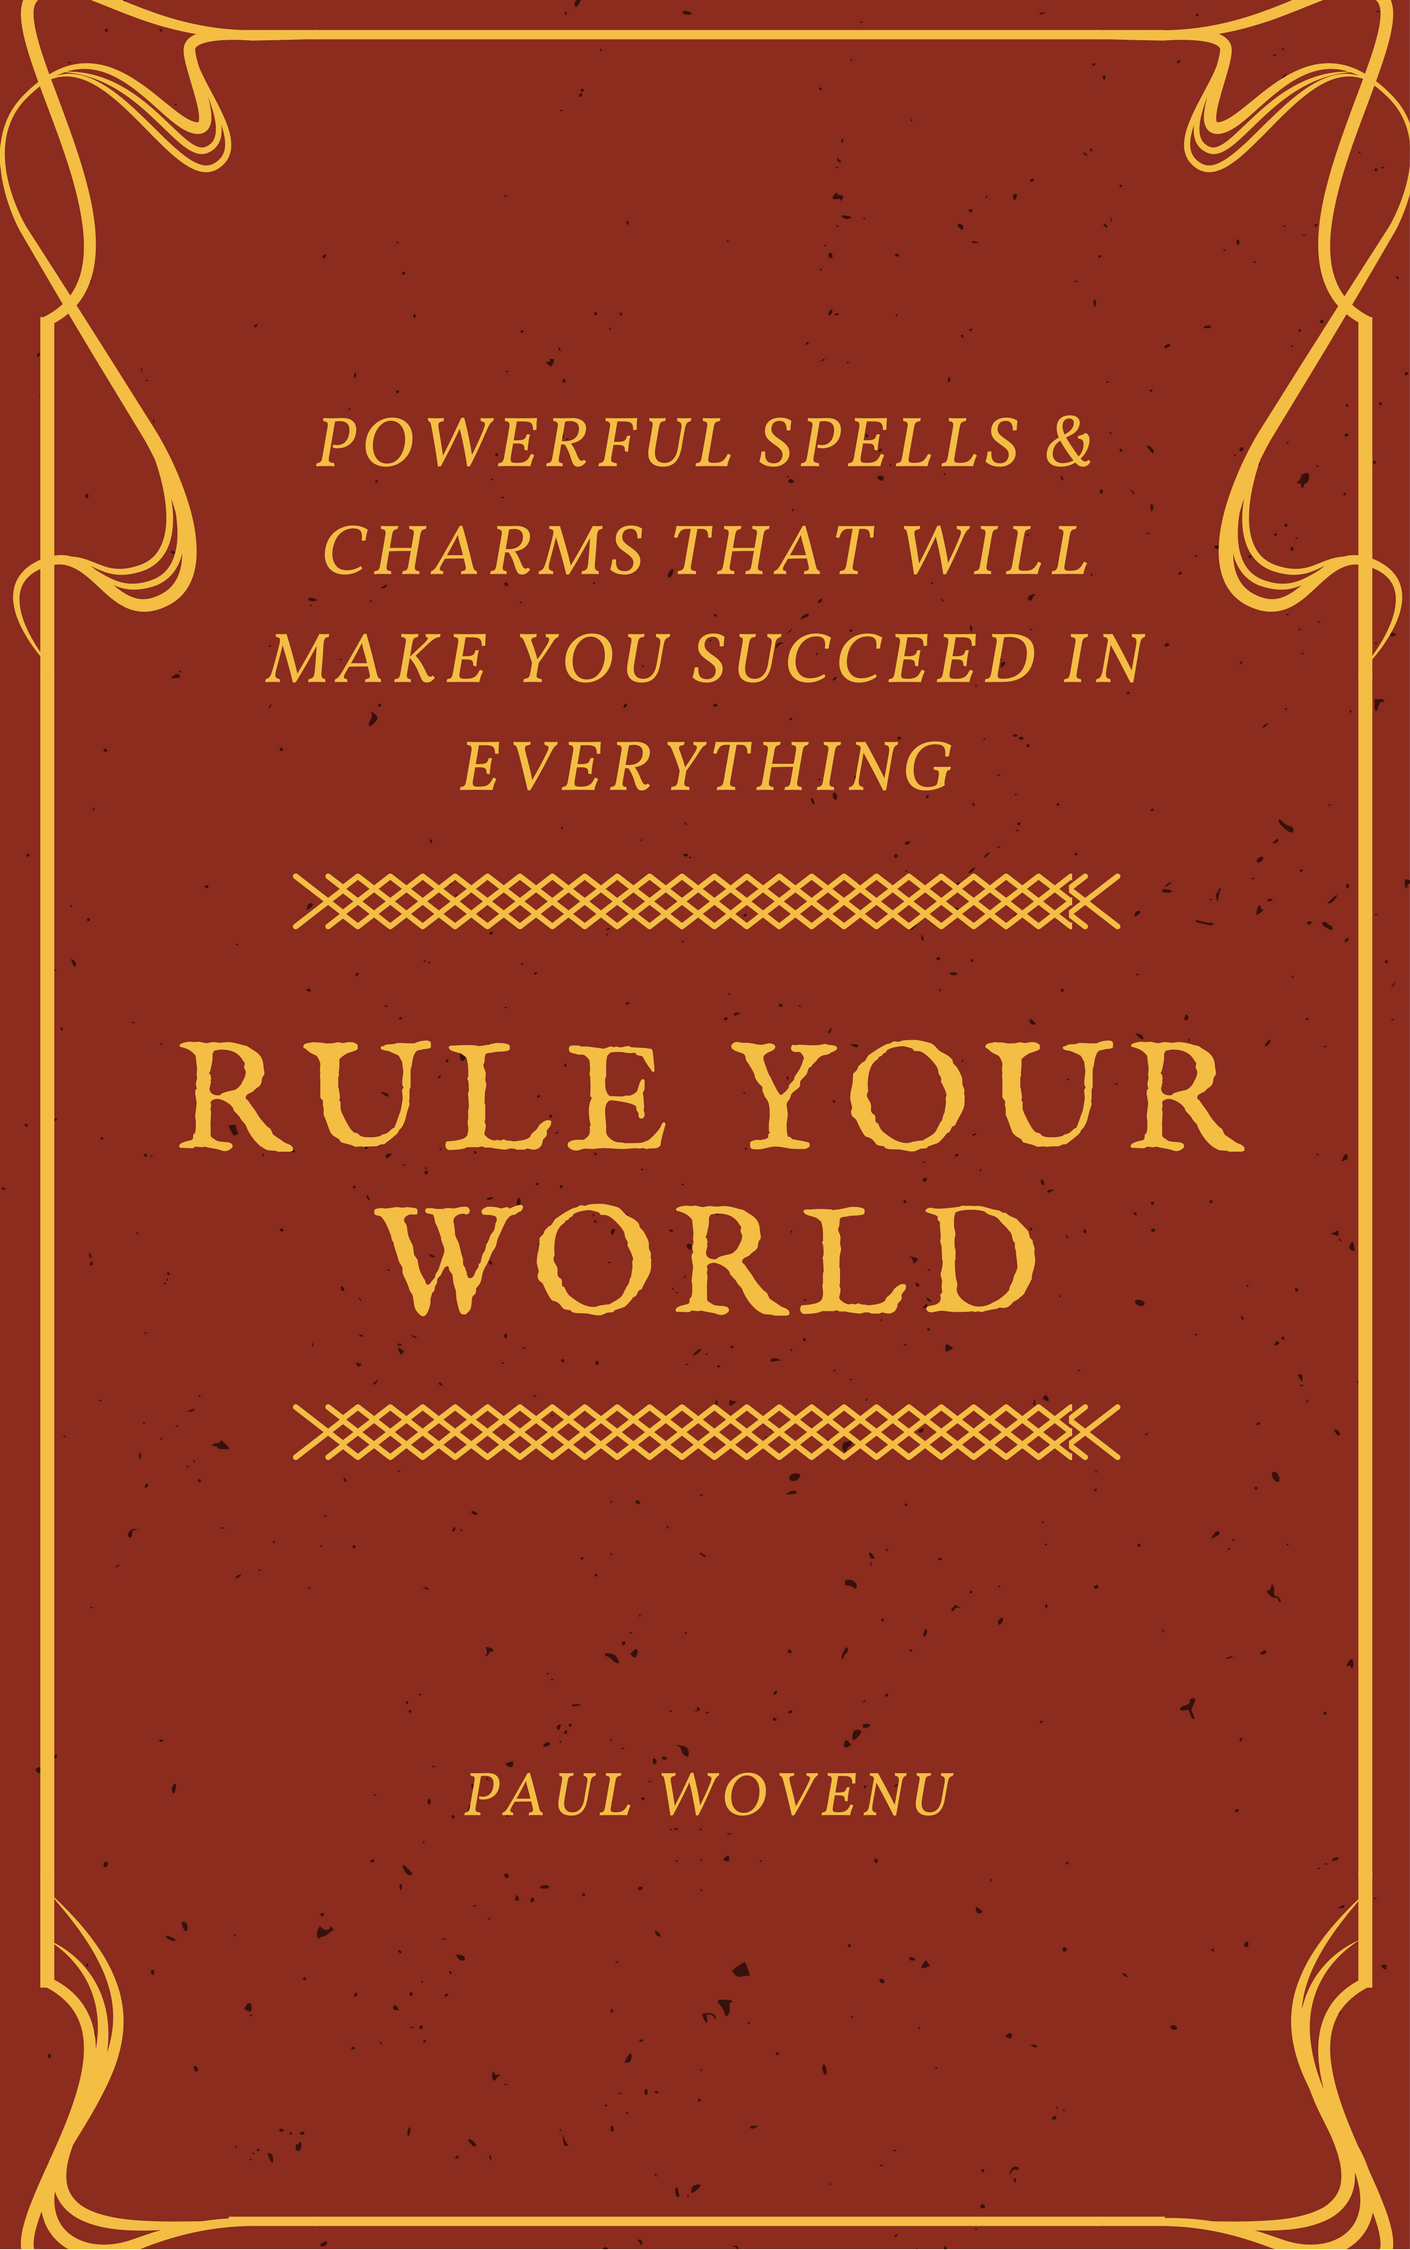 RULE YOUR WORLD